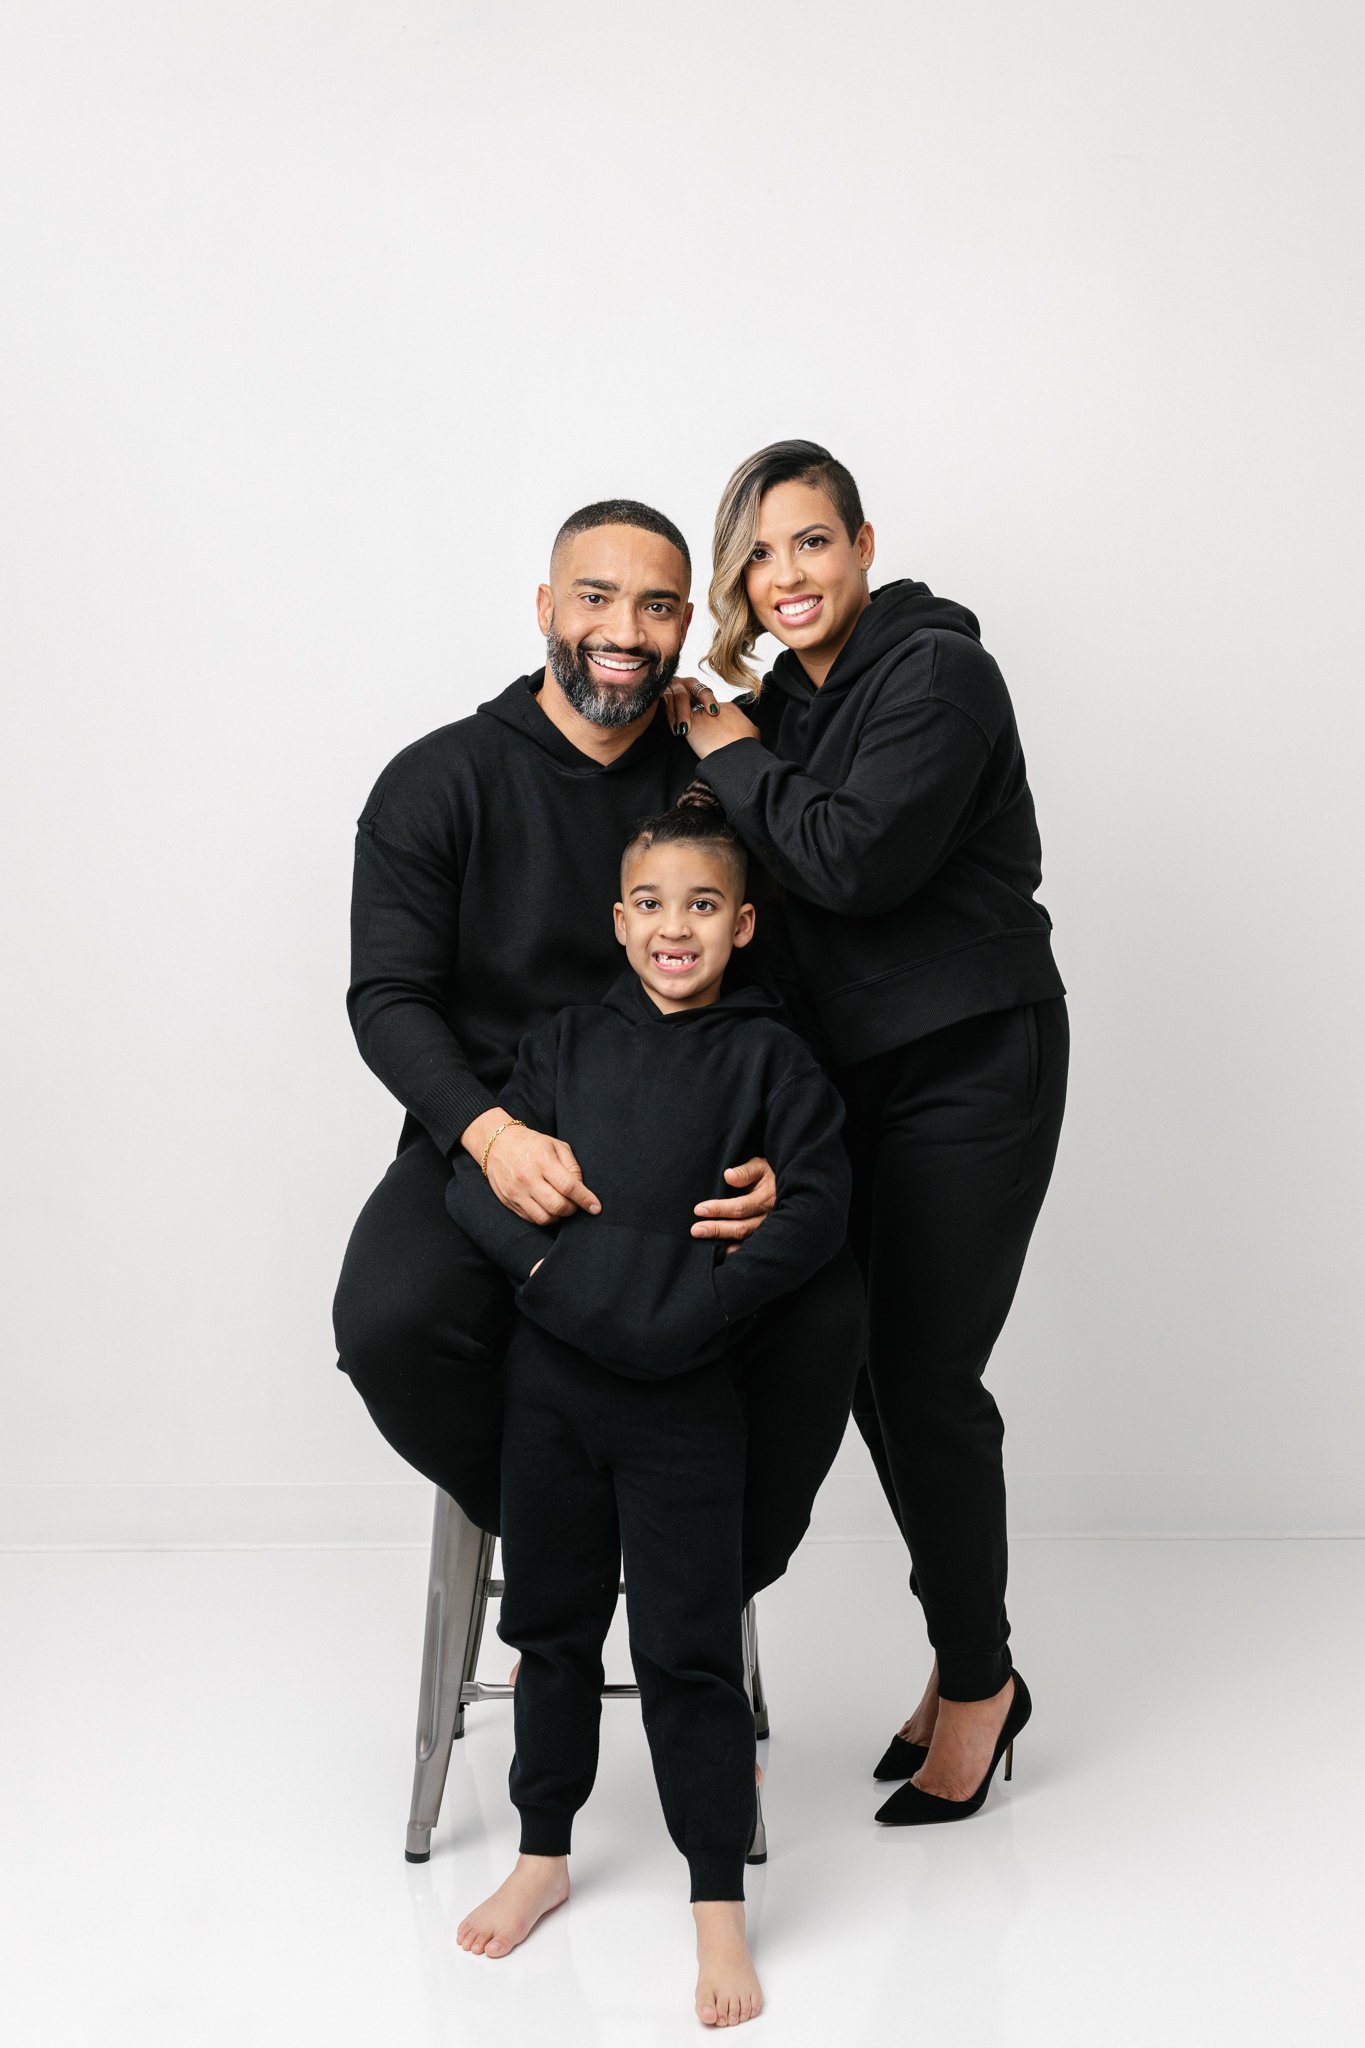  The perfect modern family portrait idea captured by Nicole Hawkins Photography. modern family studio portraits NJ #NicoleHawkinsPhotograaphy #NicoleHawkinsFamilies #Modernfamilypictures #studioportraits #matchingfamilyoutfits #NJphotographer 